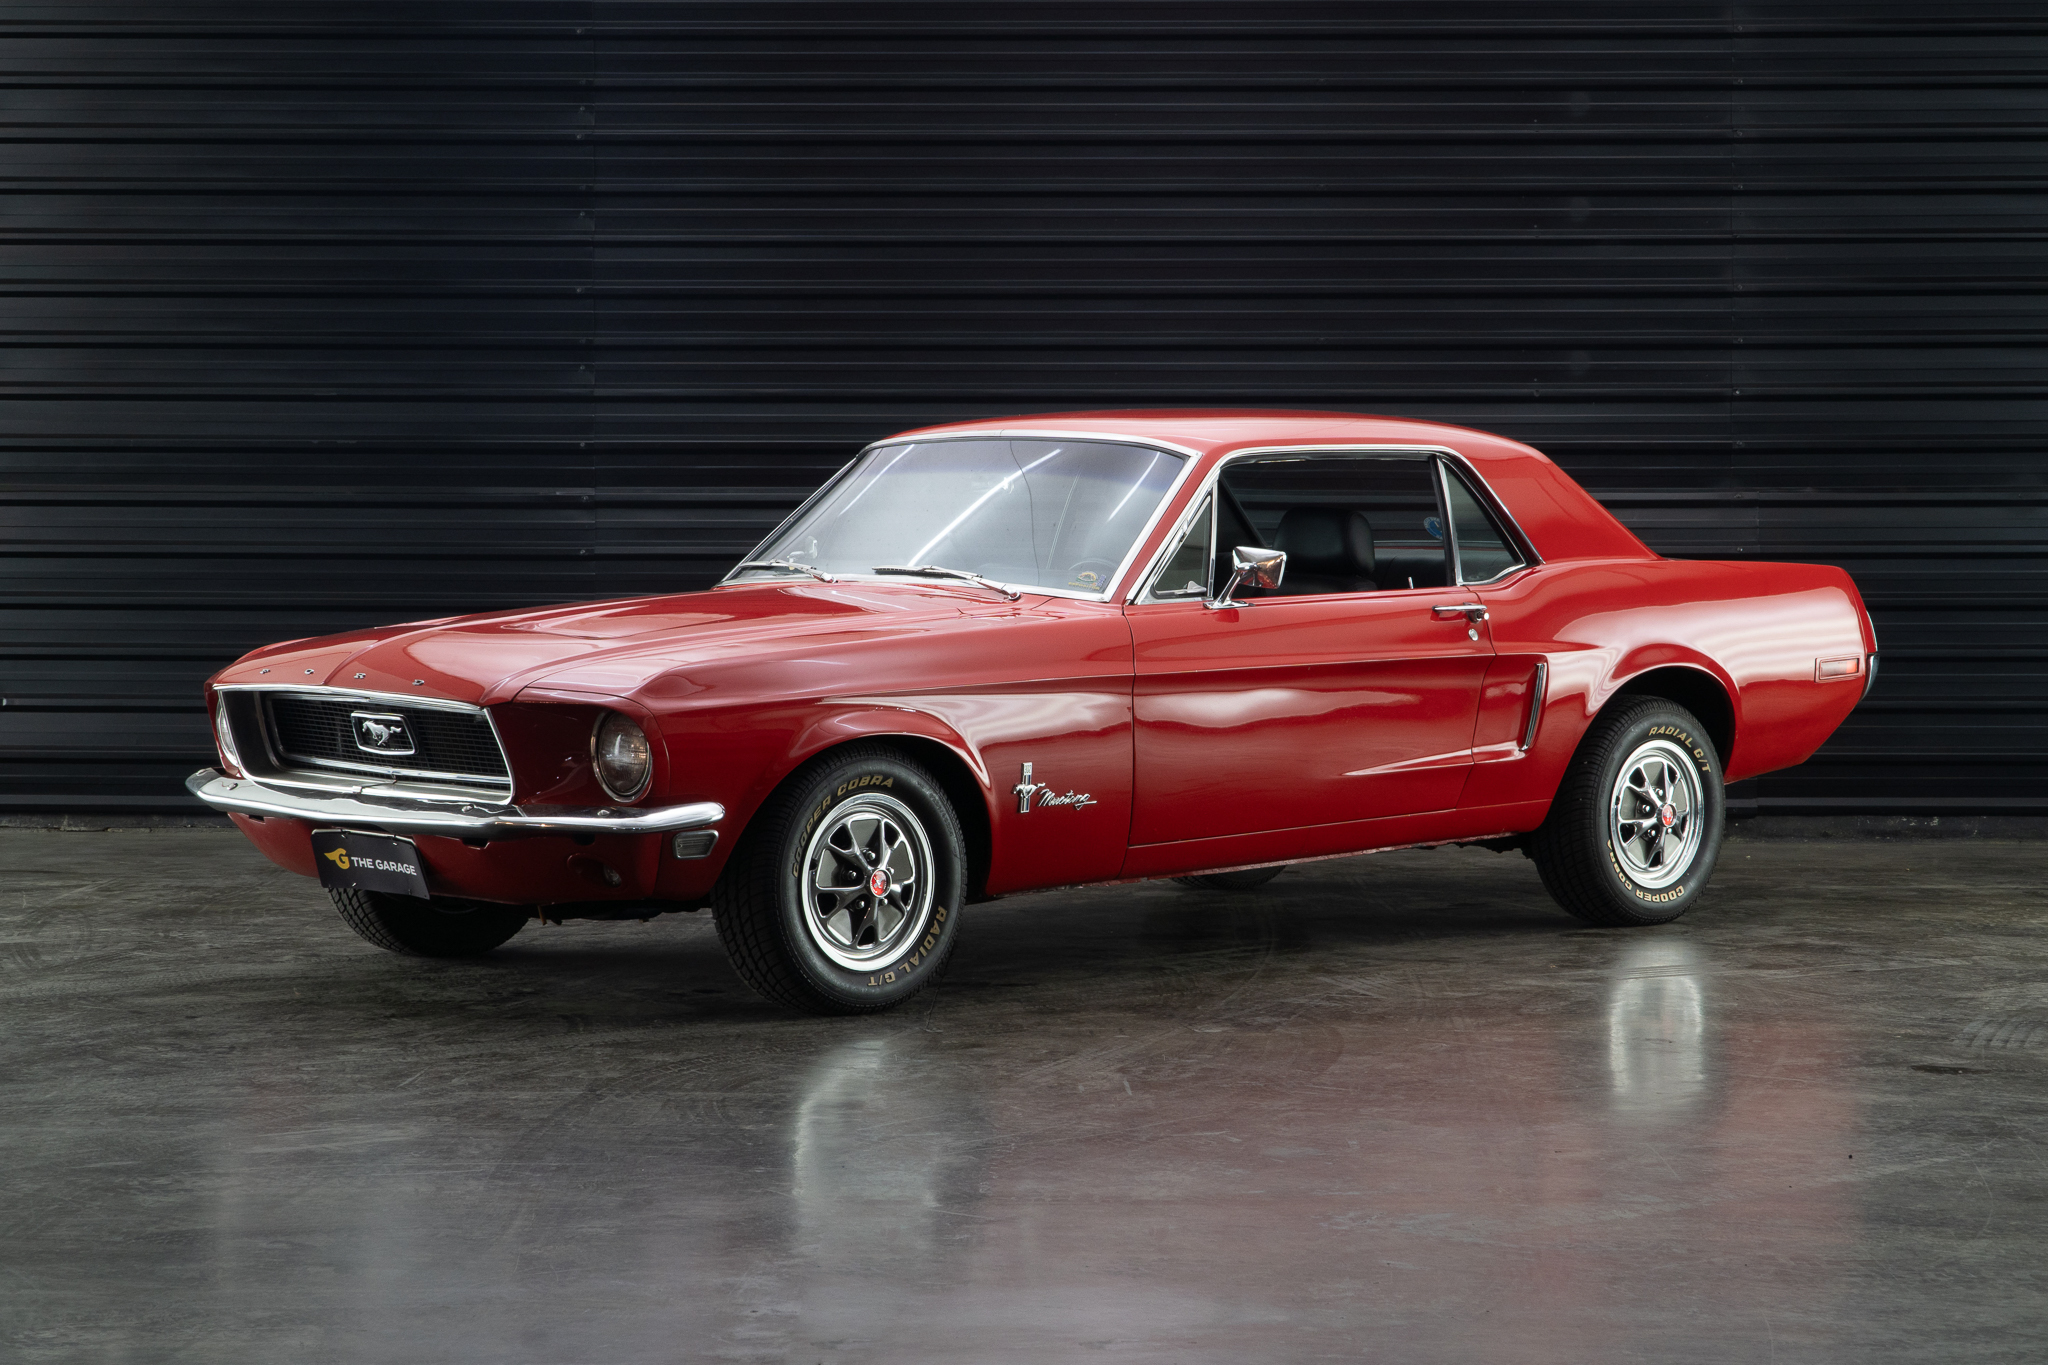 1968 Ford Mustang Hardtop a venda the garage for sale